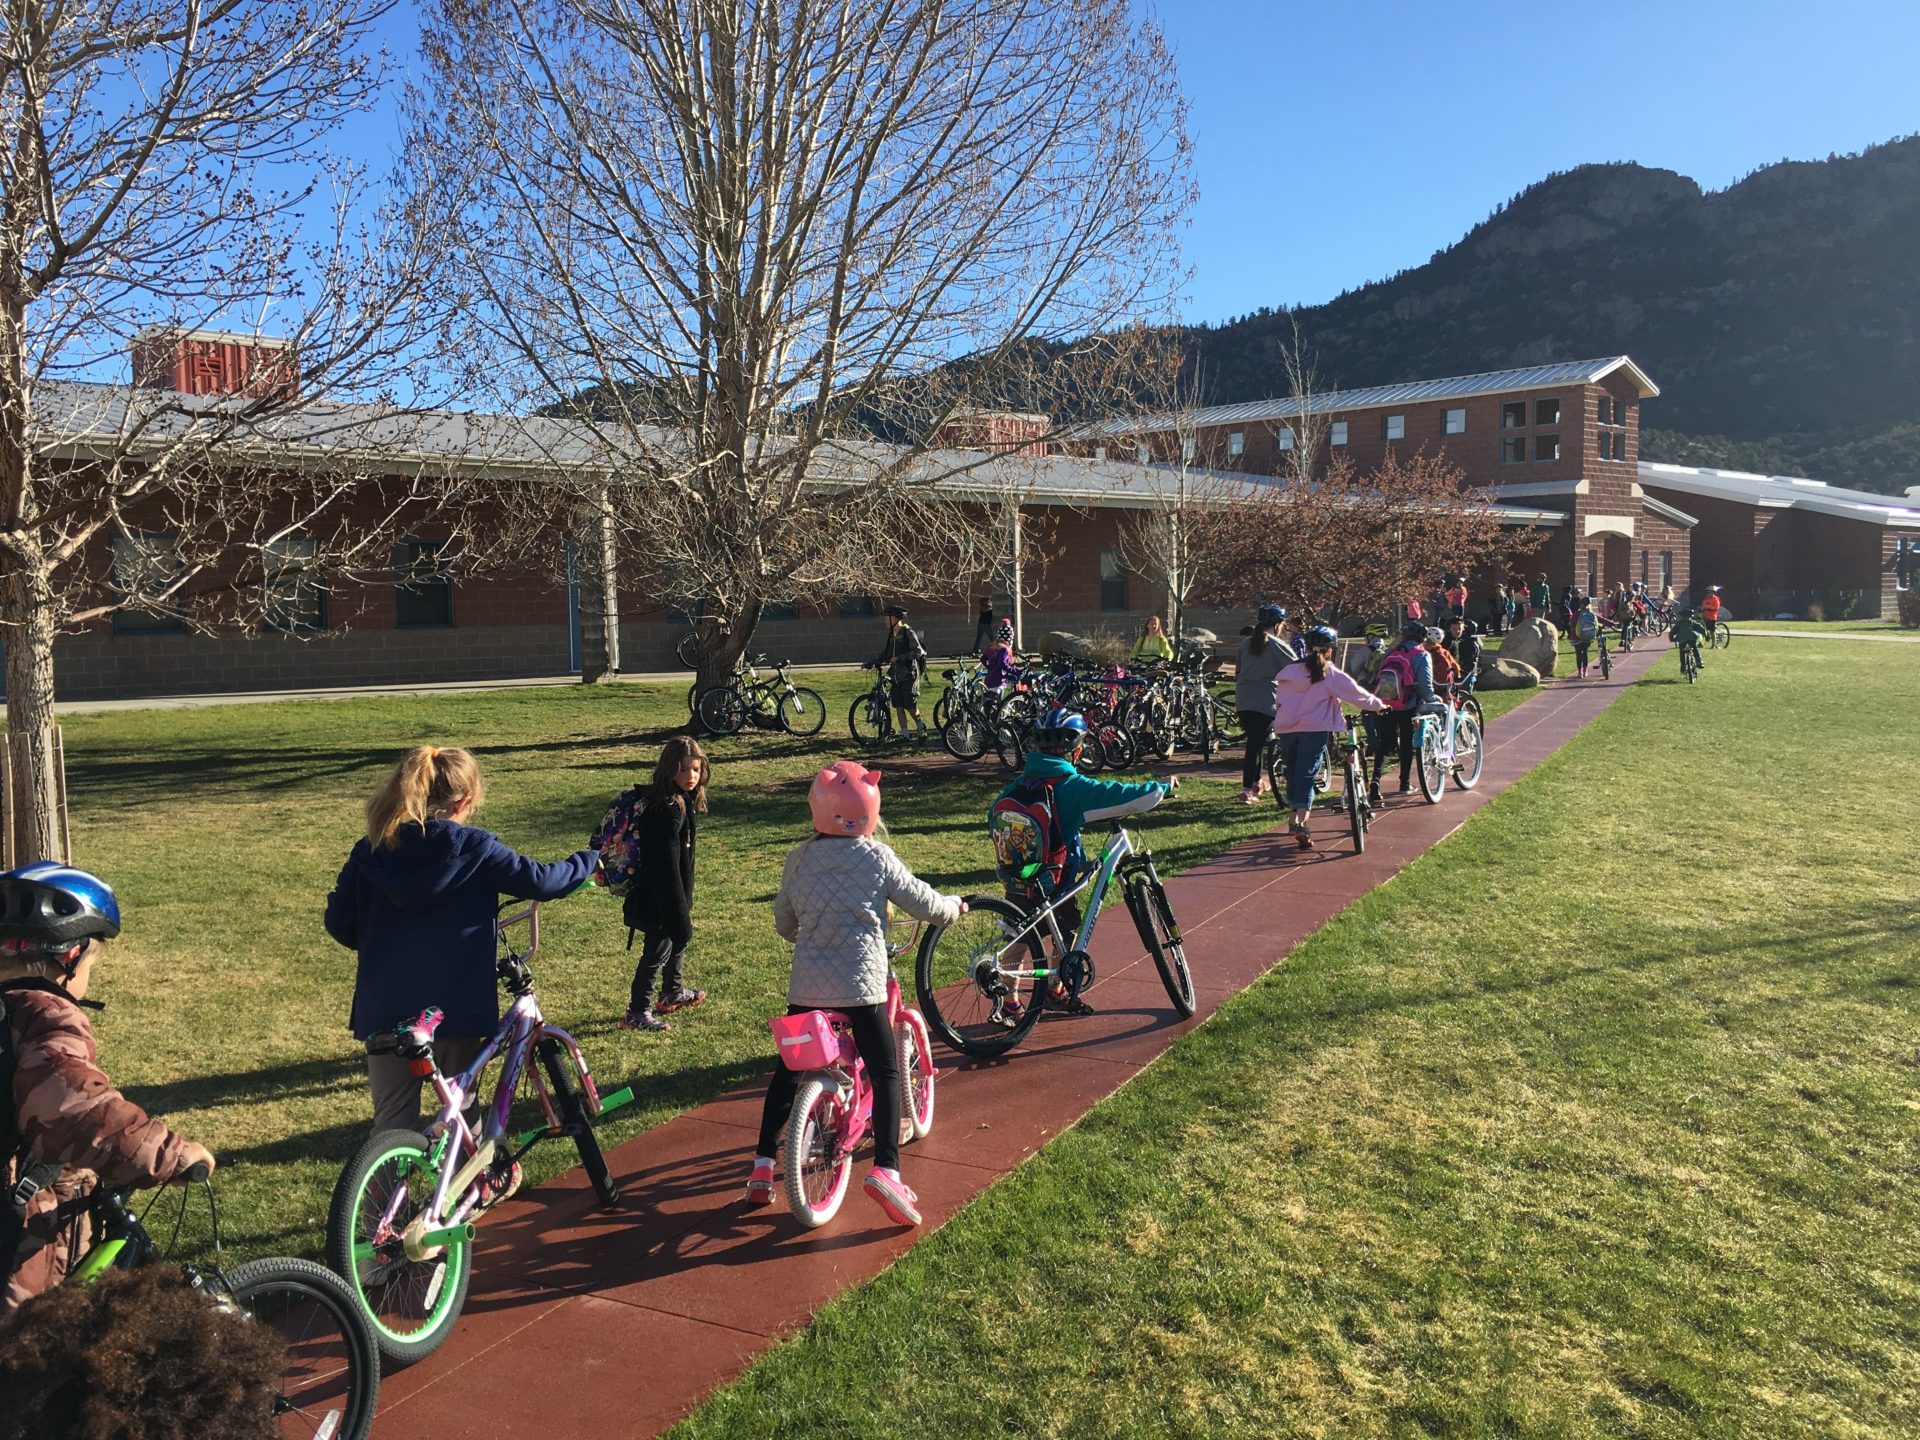 A group of children ride bikes up a sidewalk toward a school building in the background.